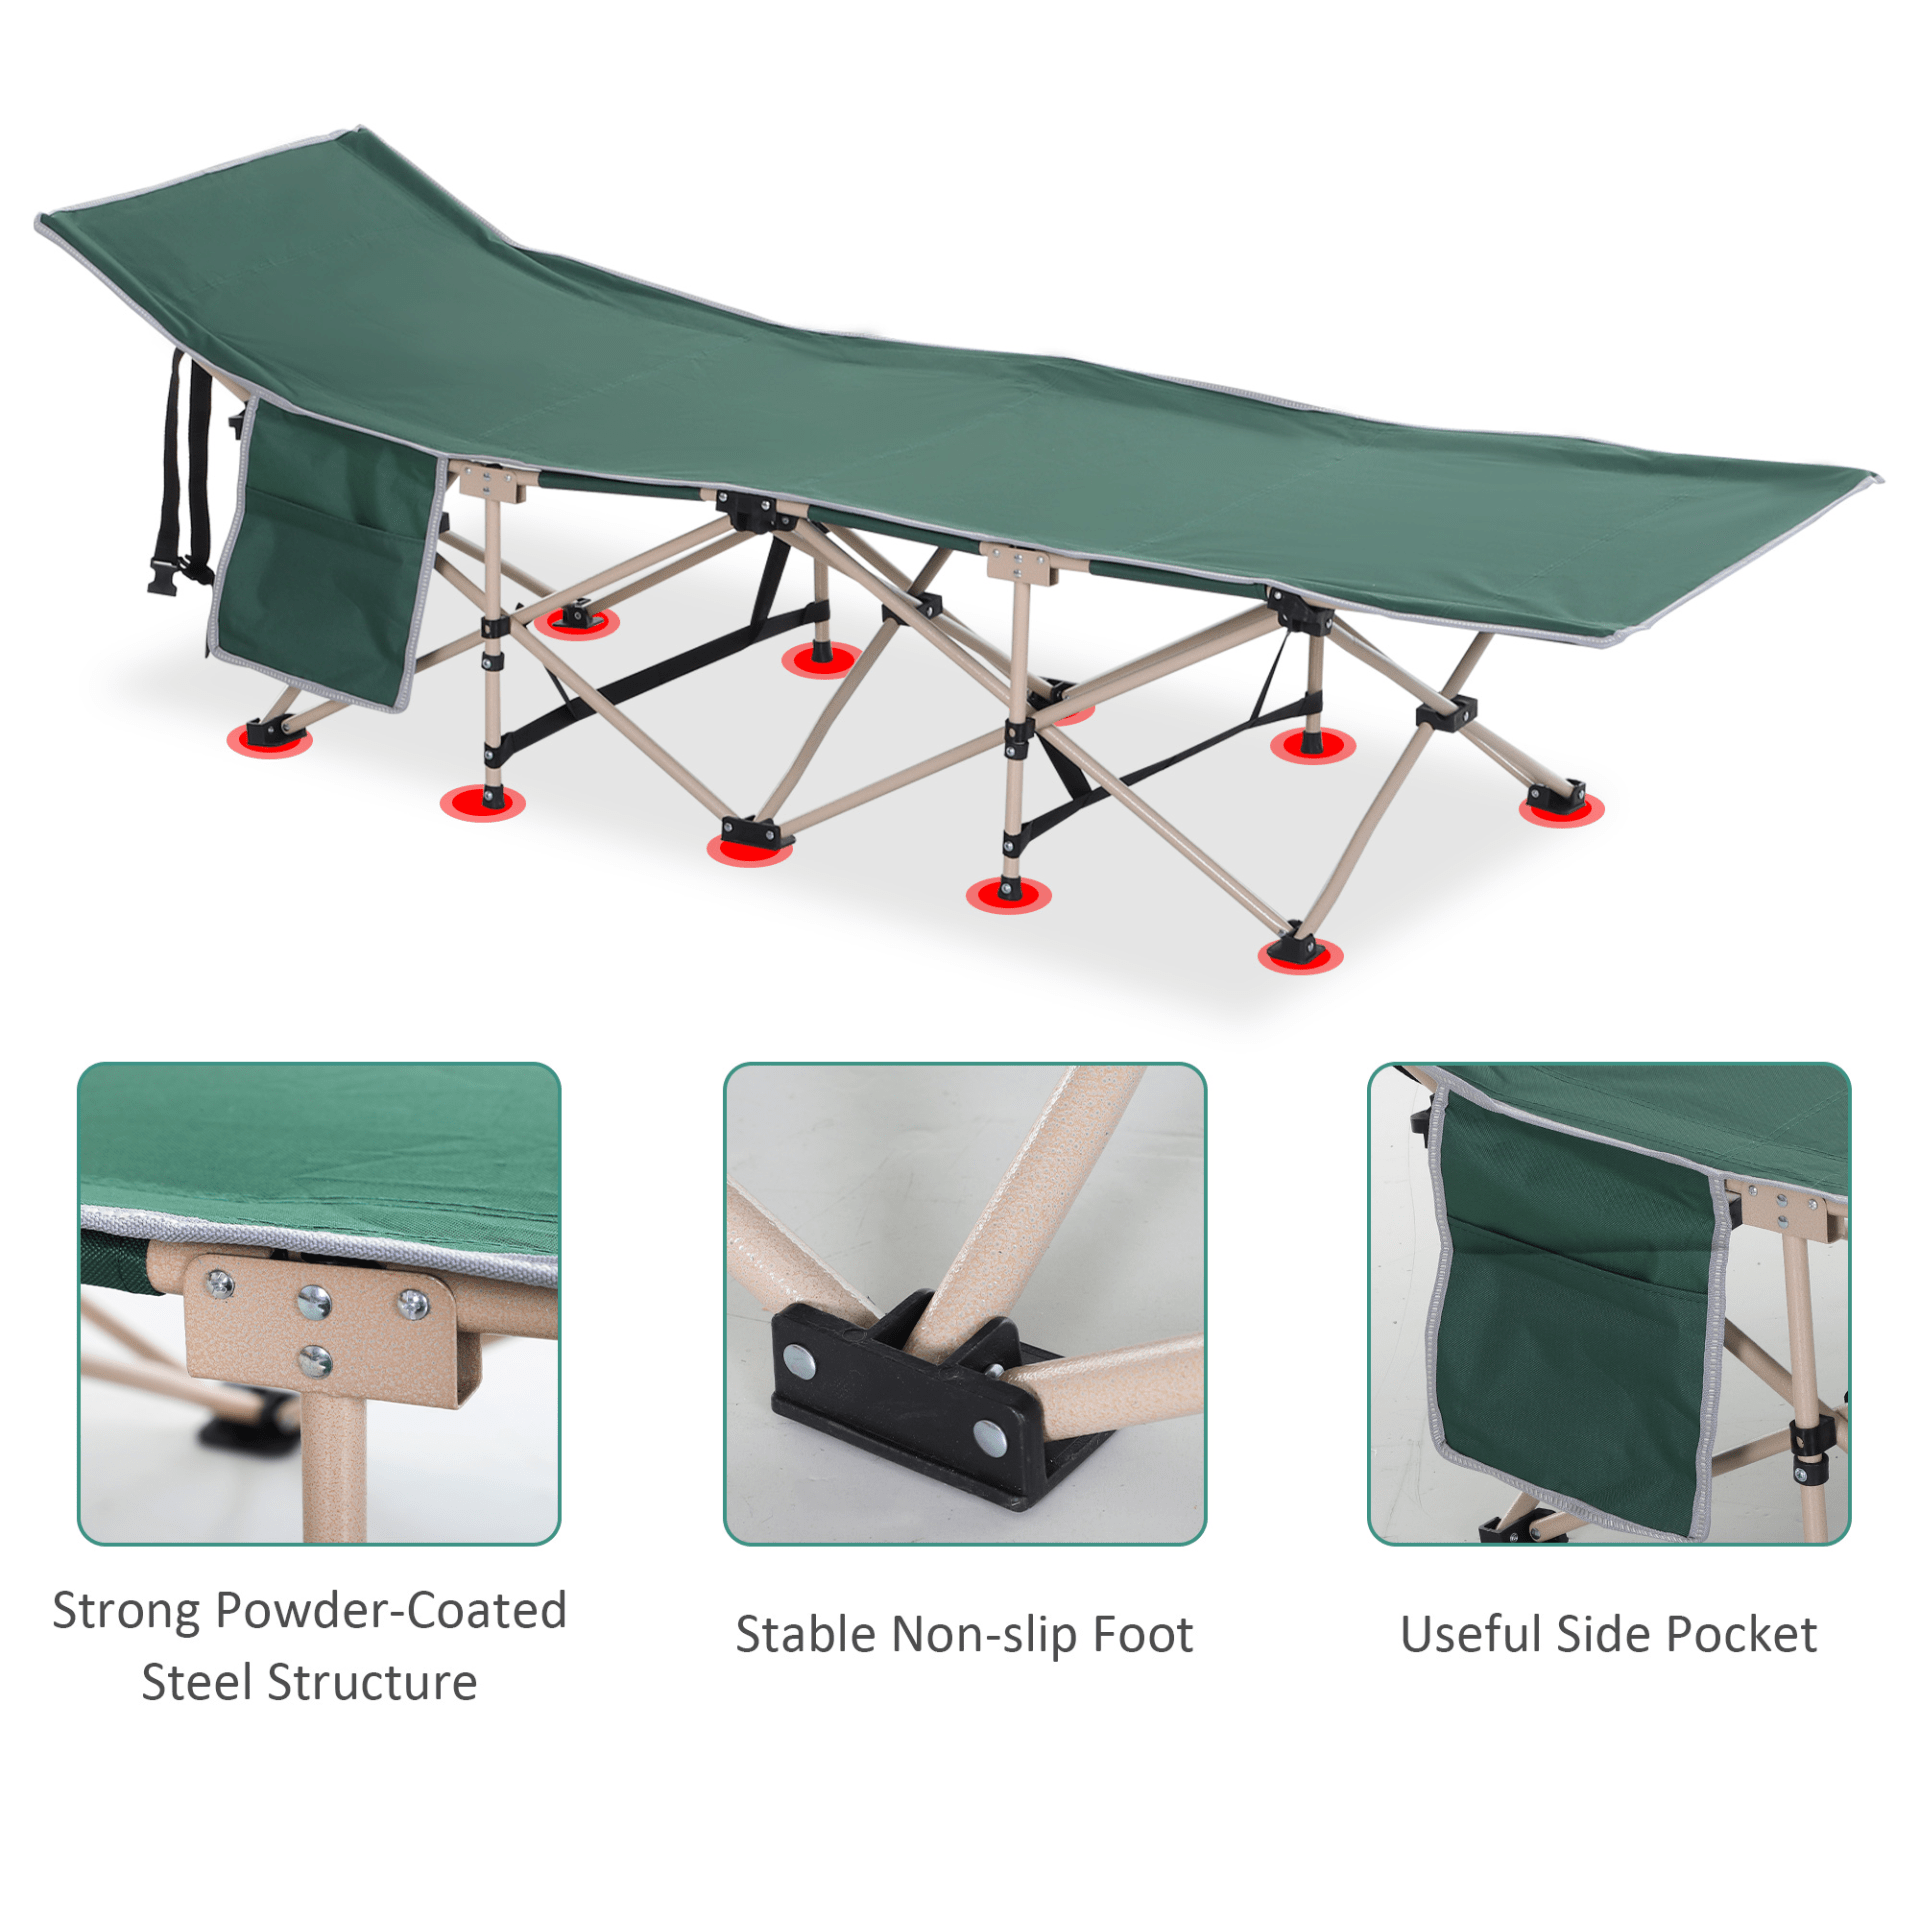 Outsunny Single Person Camping Bed Folding Cot - Green | Portable Military Sleeping Bed for Outdoor Adventures Sleeping Mats and Airbeds Cosy Camping Co.   